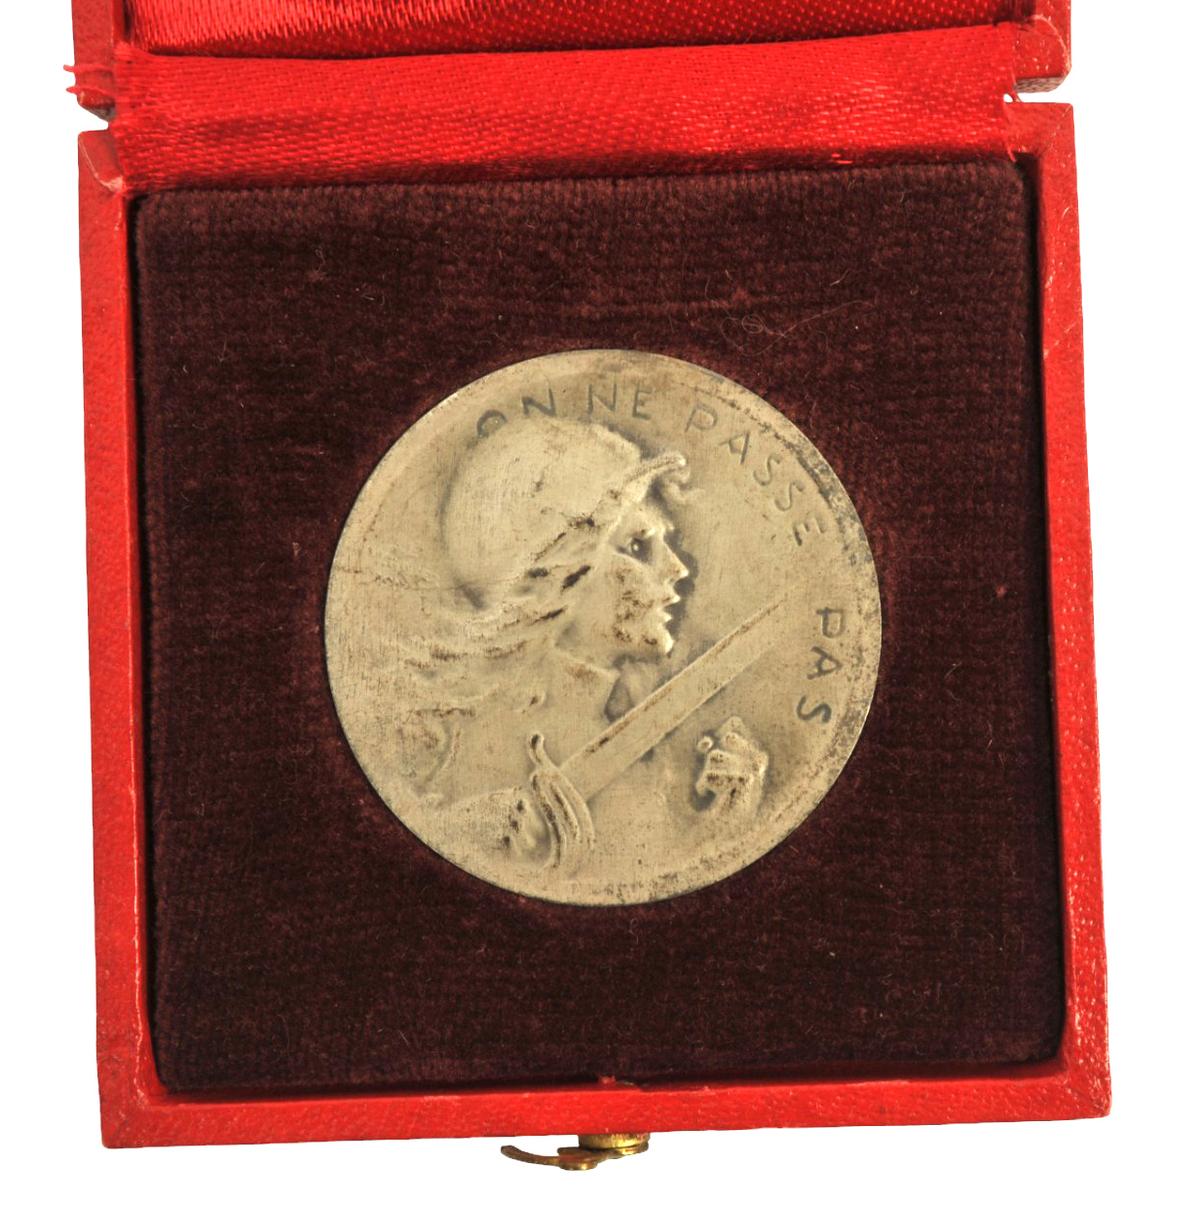 Rare French Military WWI issue 1916 Battle of Verdun Memorial Medallion in Original Case (A)